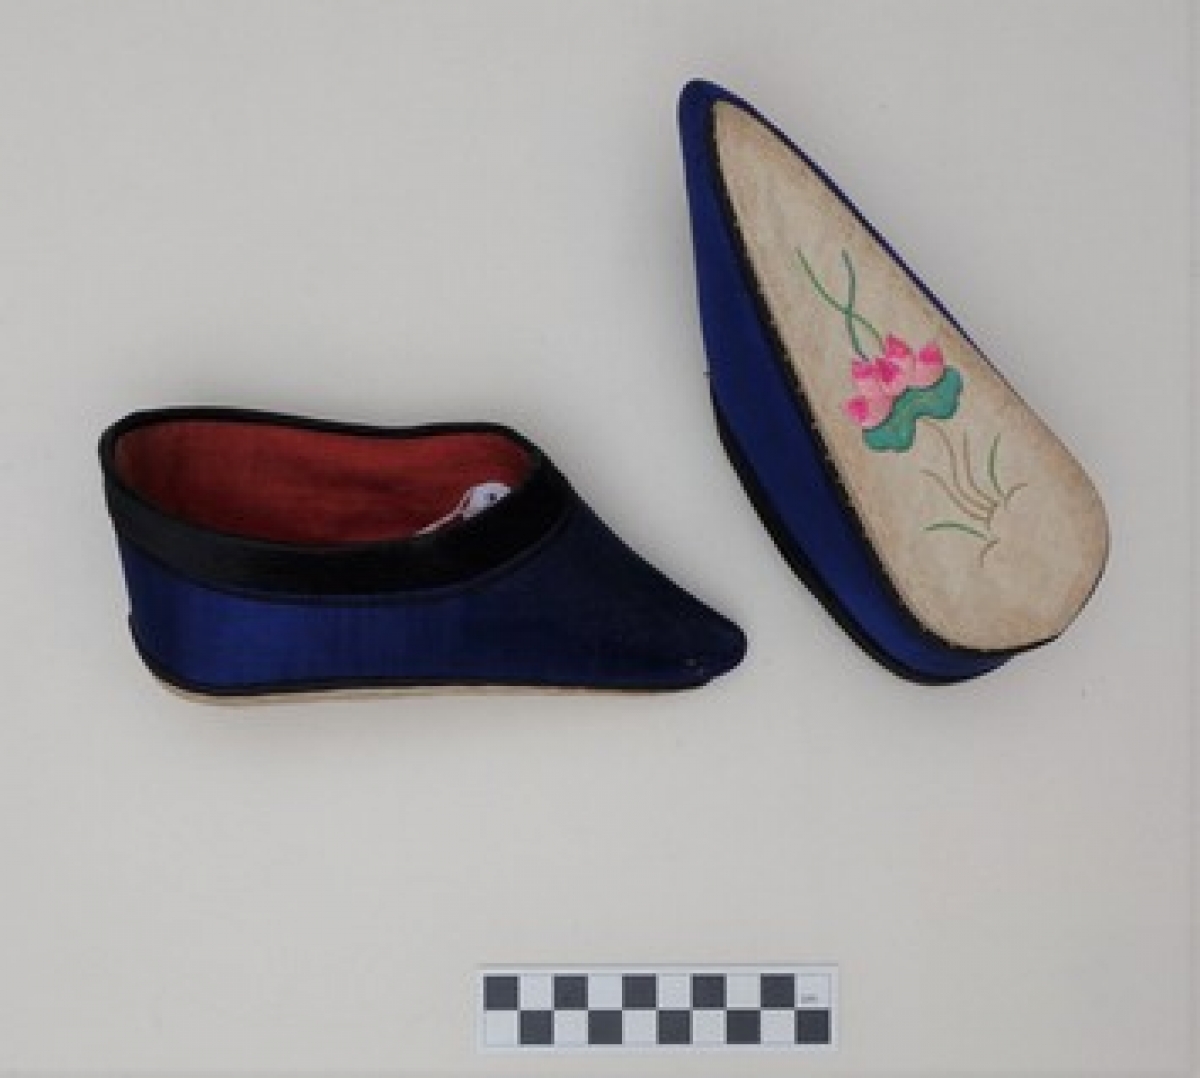 Pair of funeral lotus soes, early 20th century.